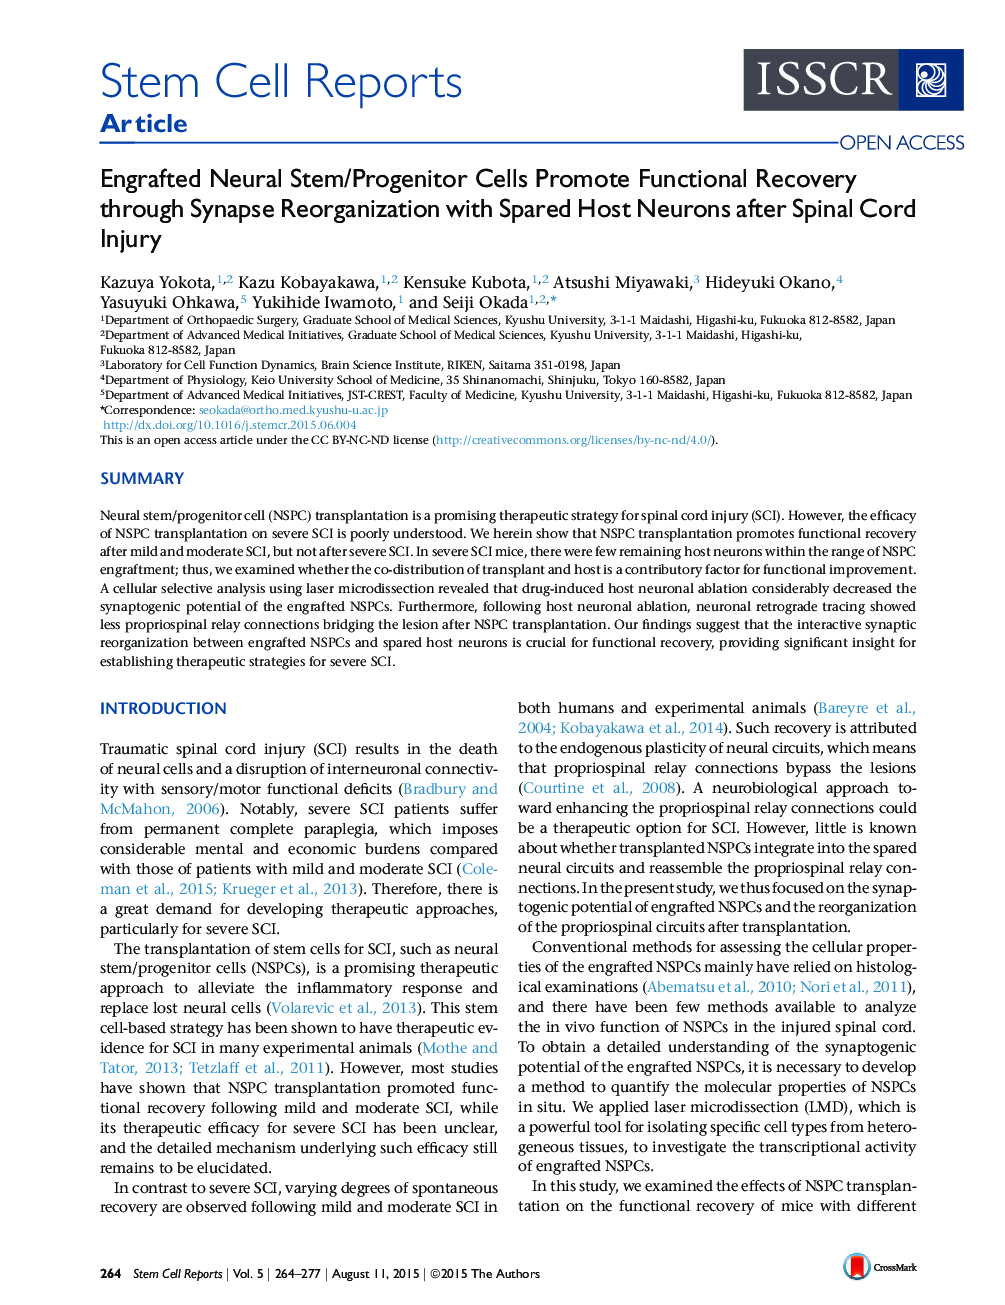 Engrafted Neural Stem/Progenitor Cells Promote Functional Recovery through Synapse Reorganization with Spared Host Neurons after Spinal Cord Injury 